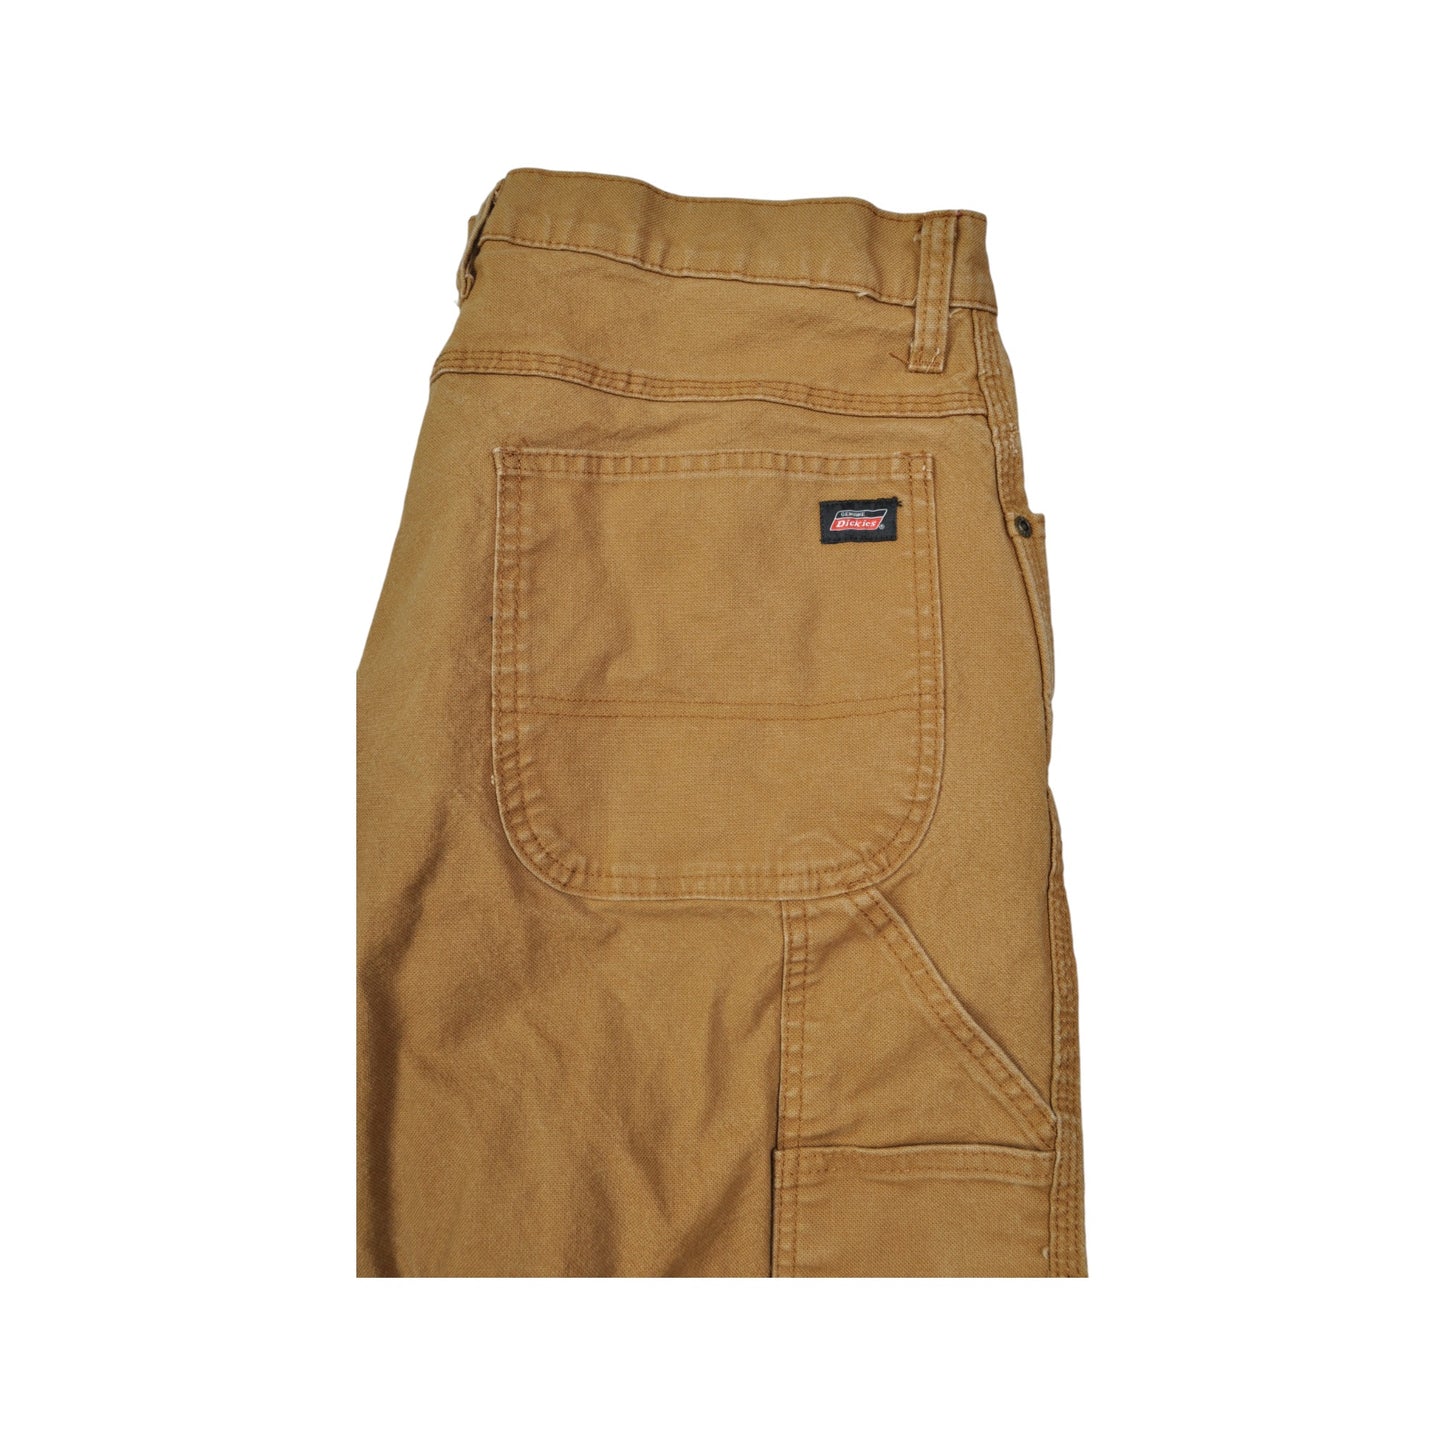 Vintage Dickies Carpenter Pants Relaxed Fit Tan W36 L32